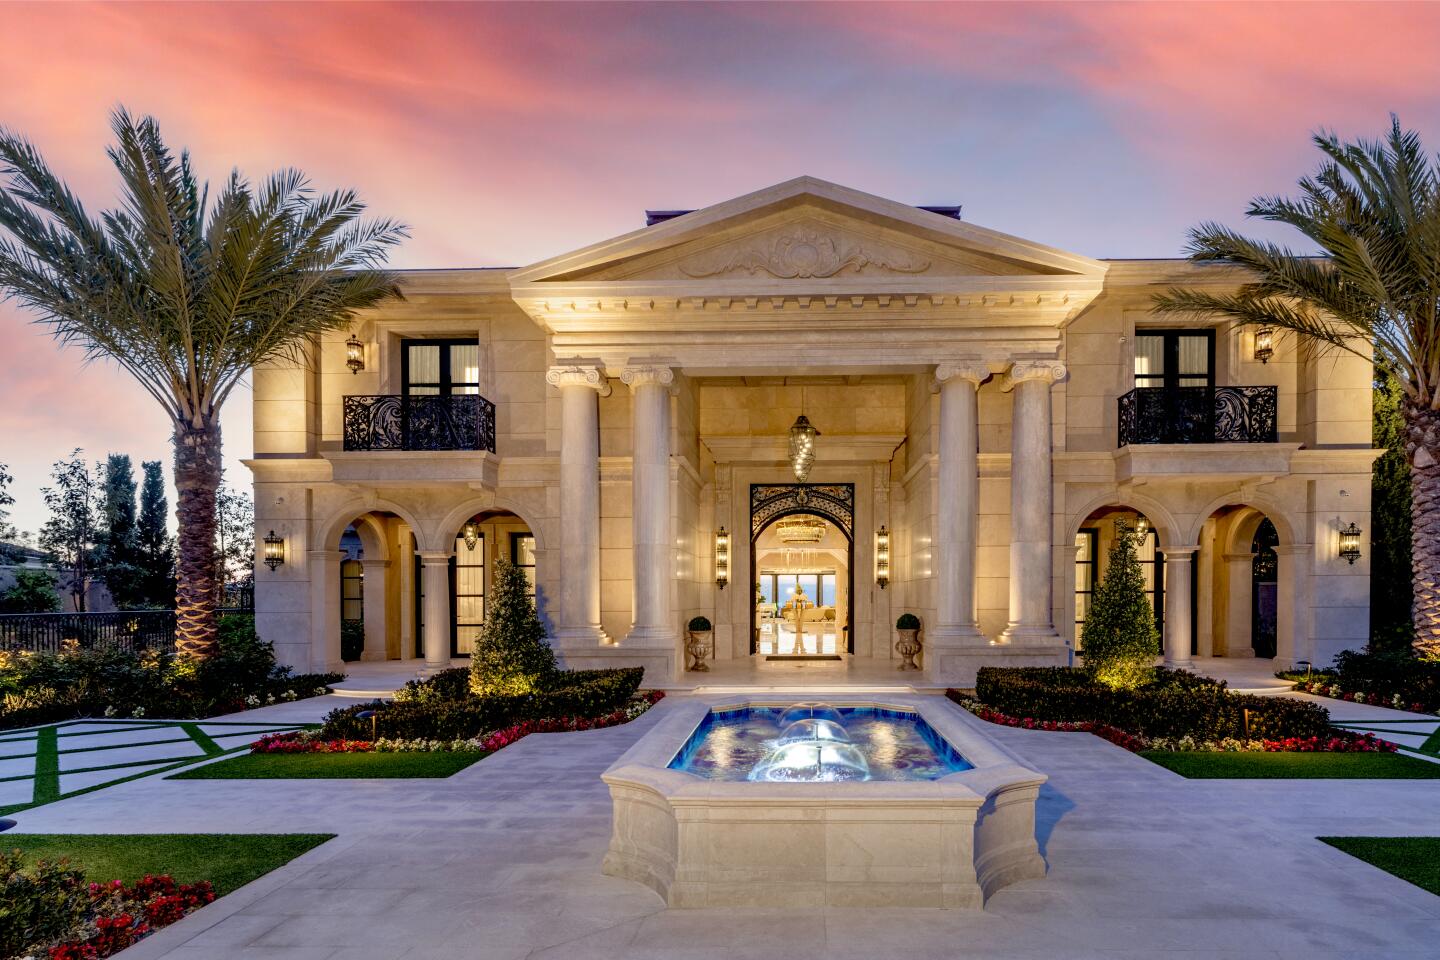 The 15,500-square-foot palace.